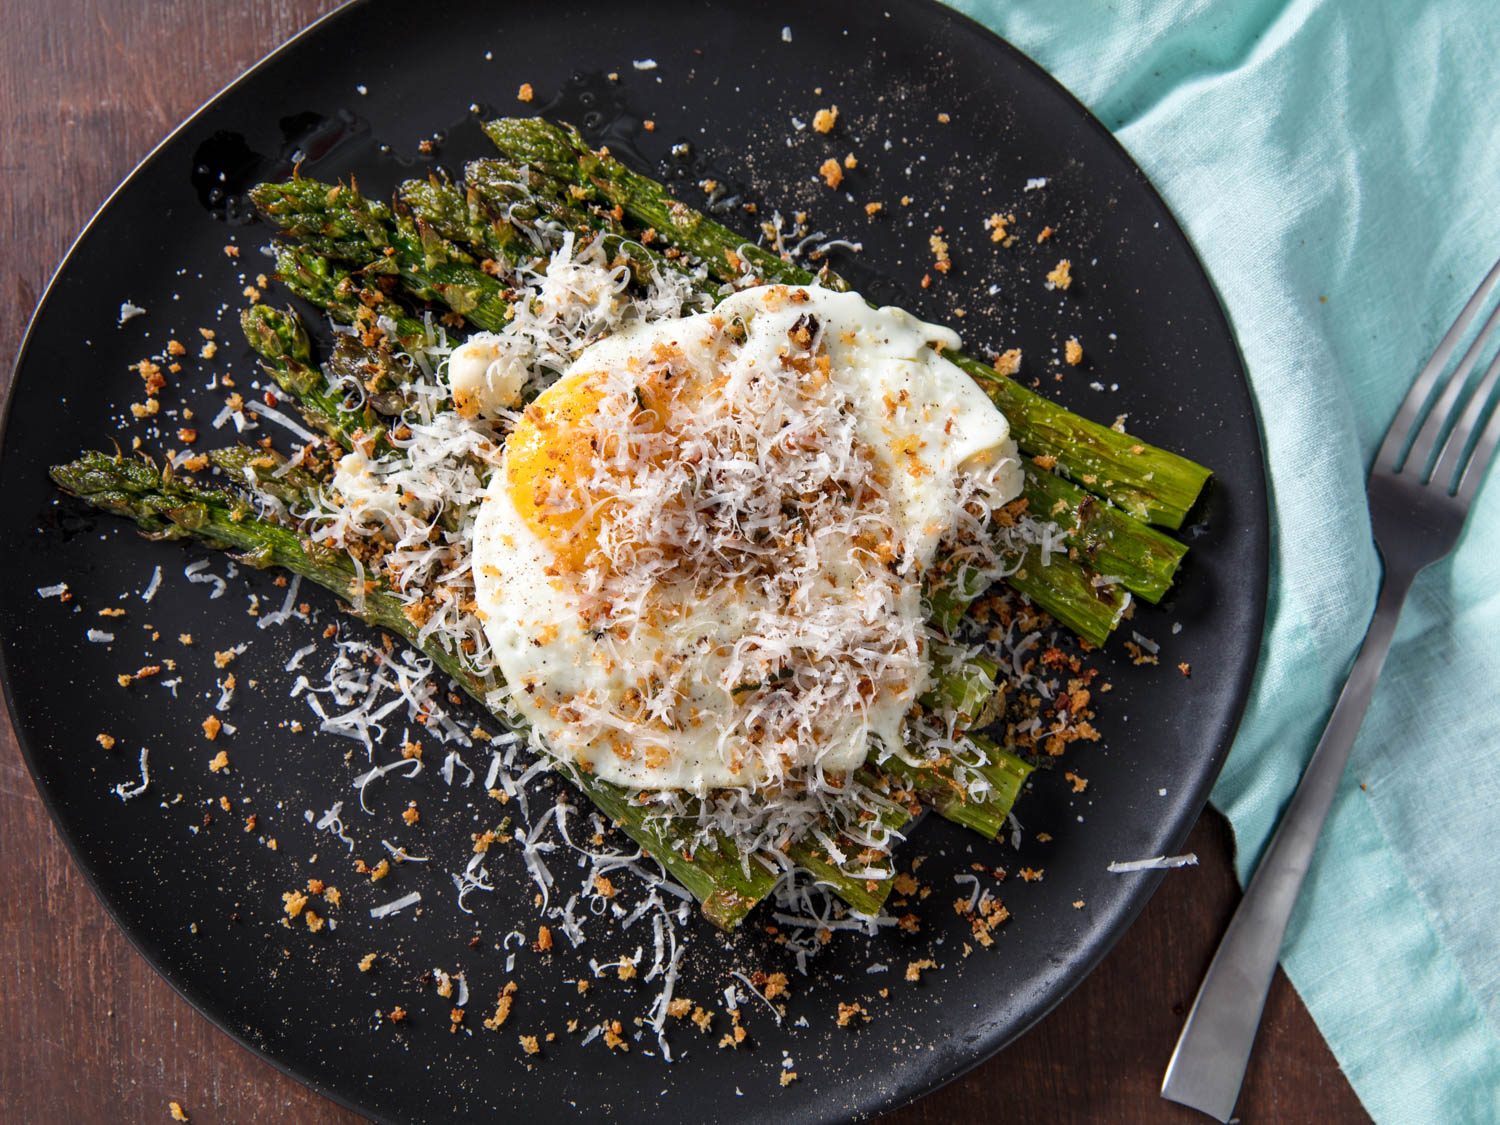 Broiled Asparagus With Fried Egg and Gorgonzola